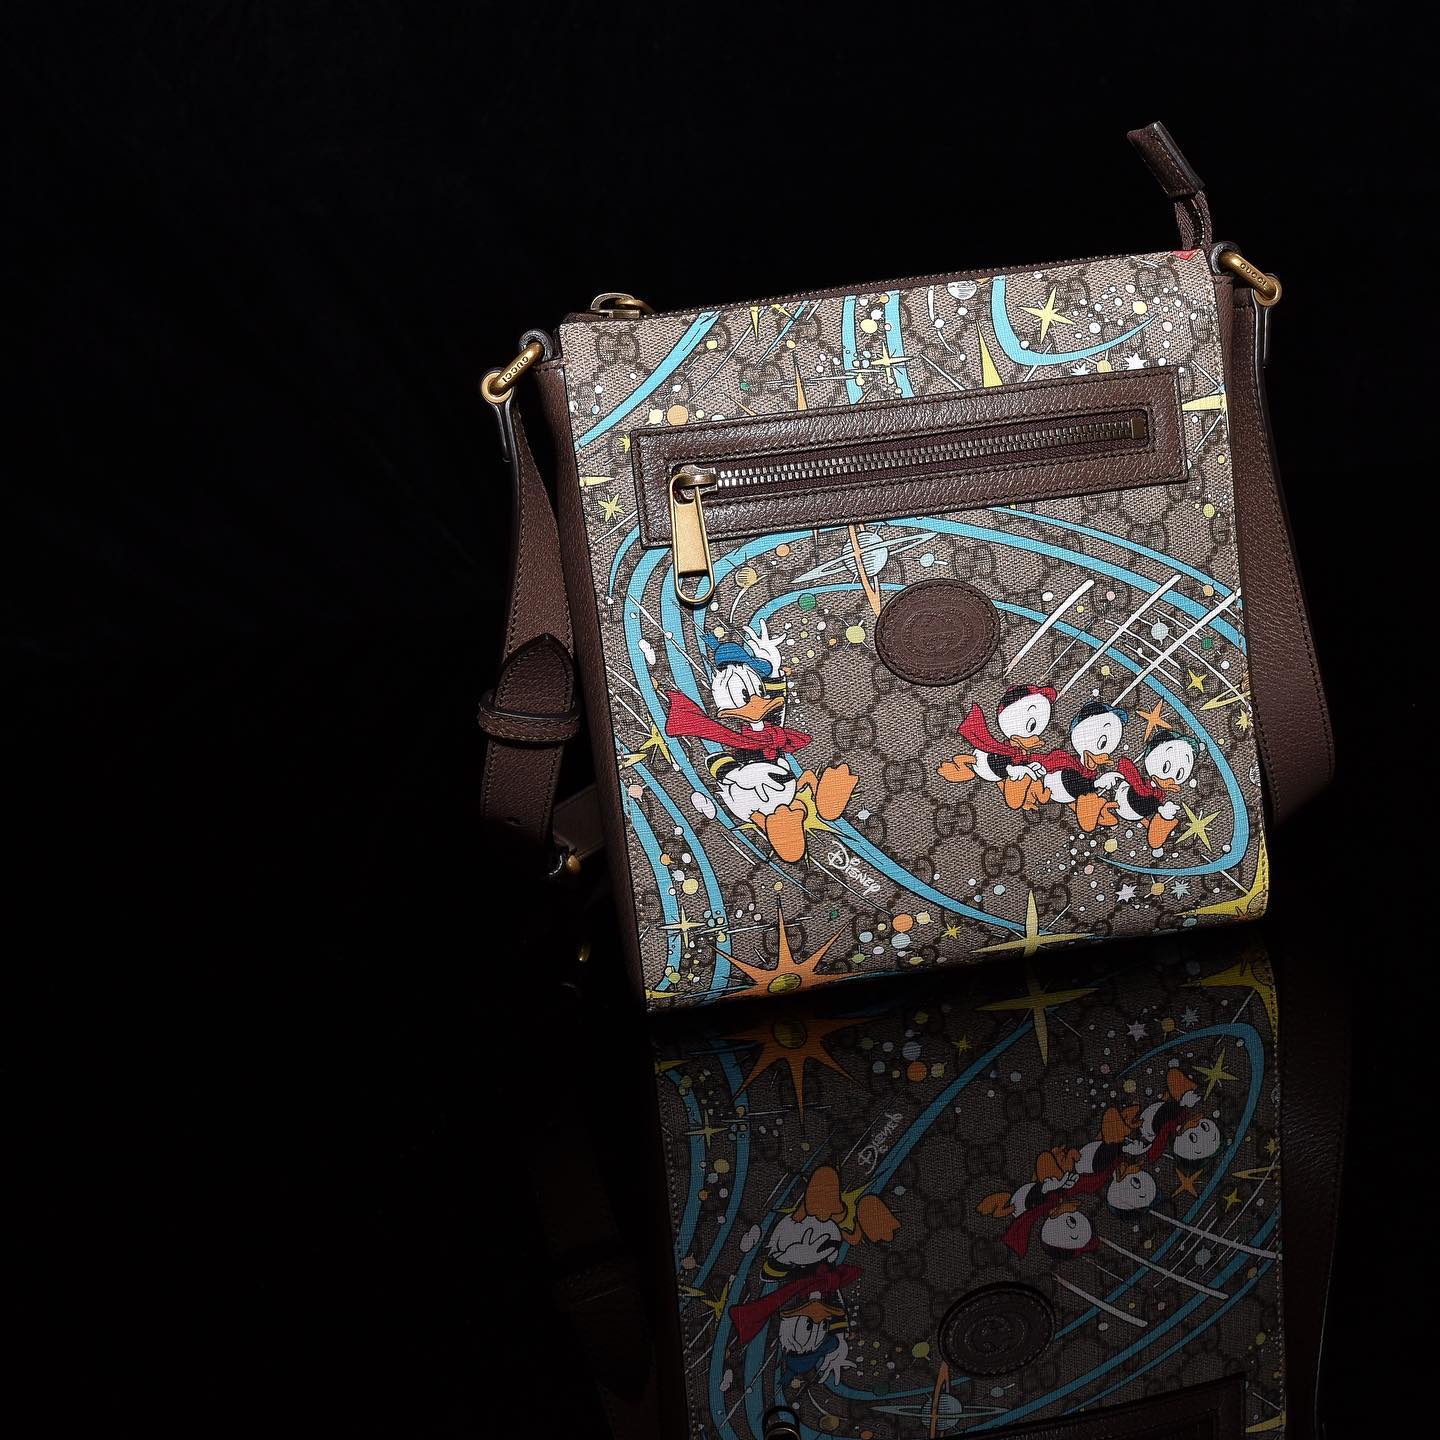 TÚI CHÉO Gucci X Disney Have Taken Things To The Next Level With This Print DSFAS.jpg